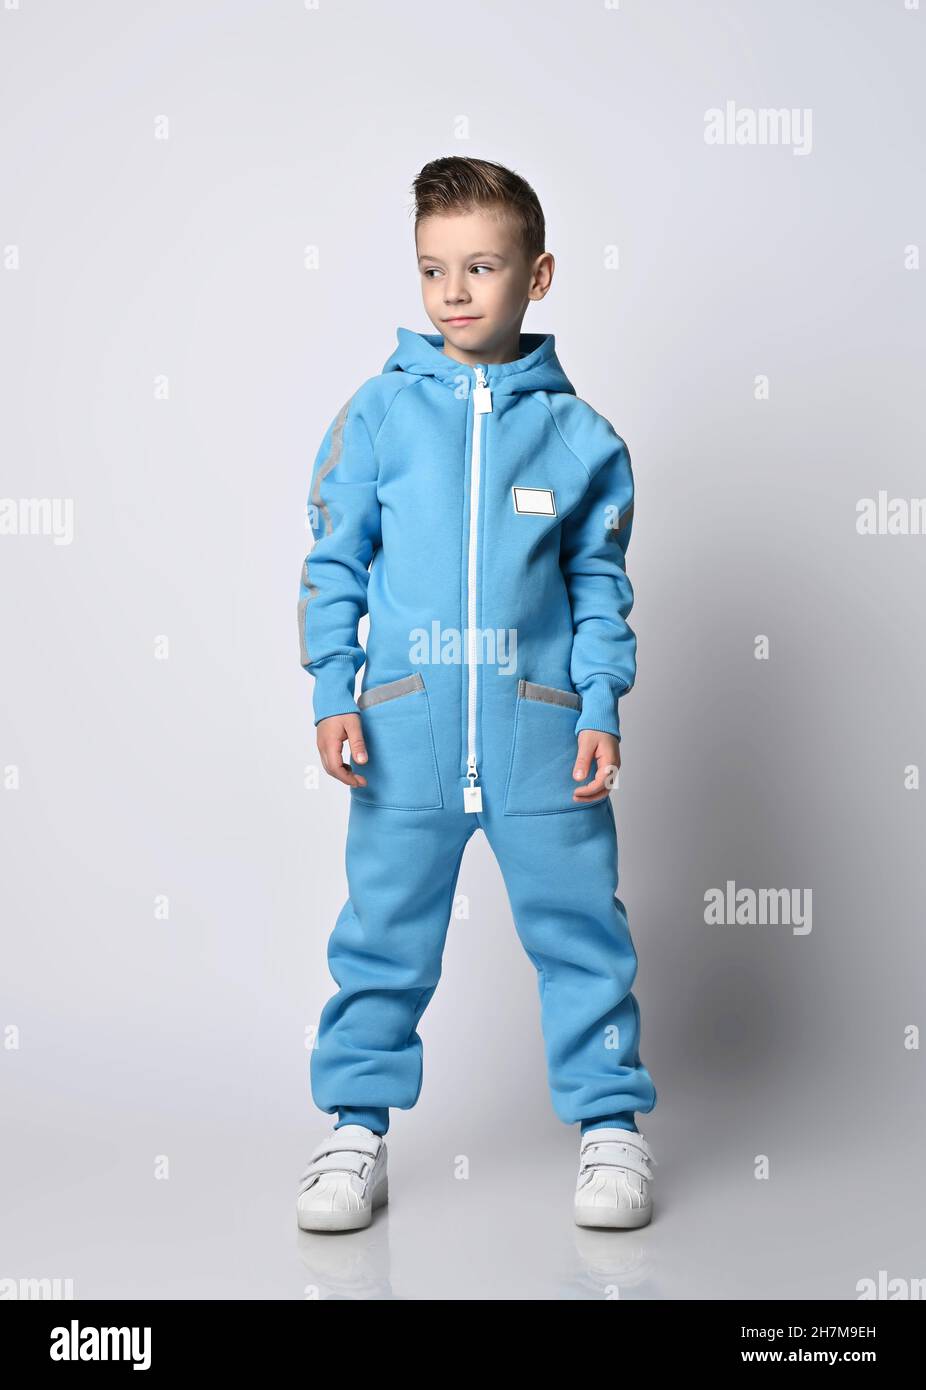 Calm, smart kid boy in blue jumpsuit with zipper and reflective stripes stands looking aside at copy space Stock Photo